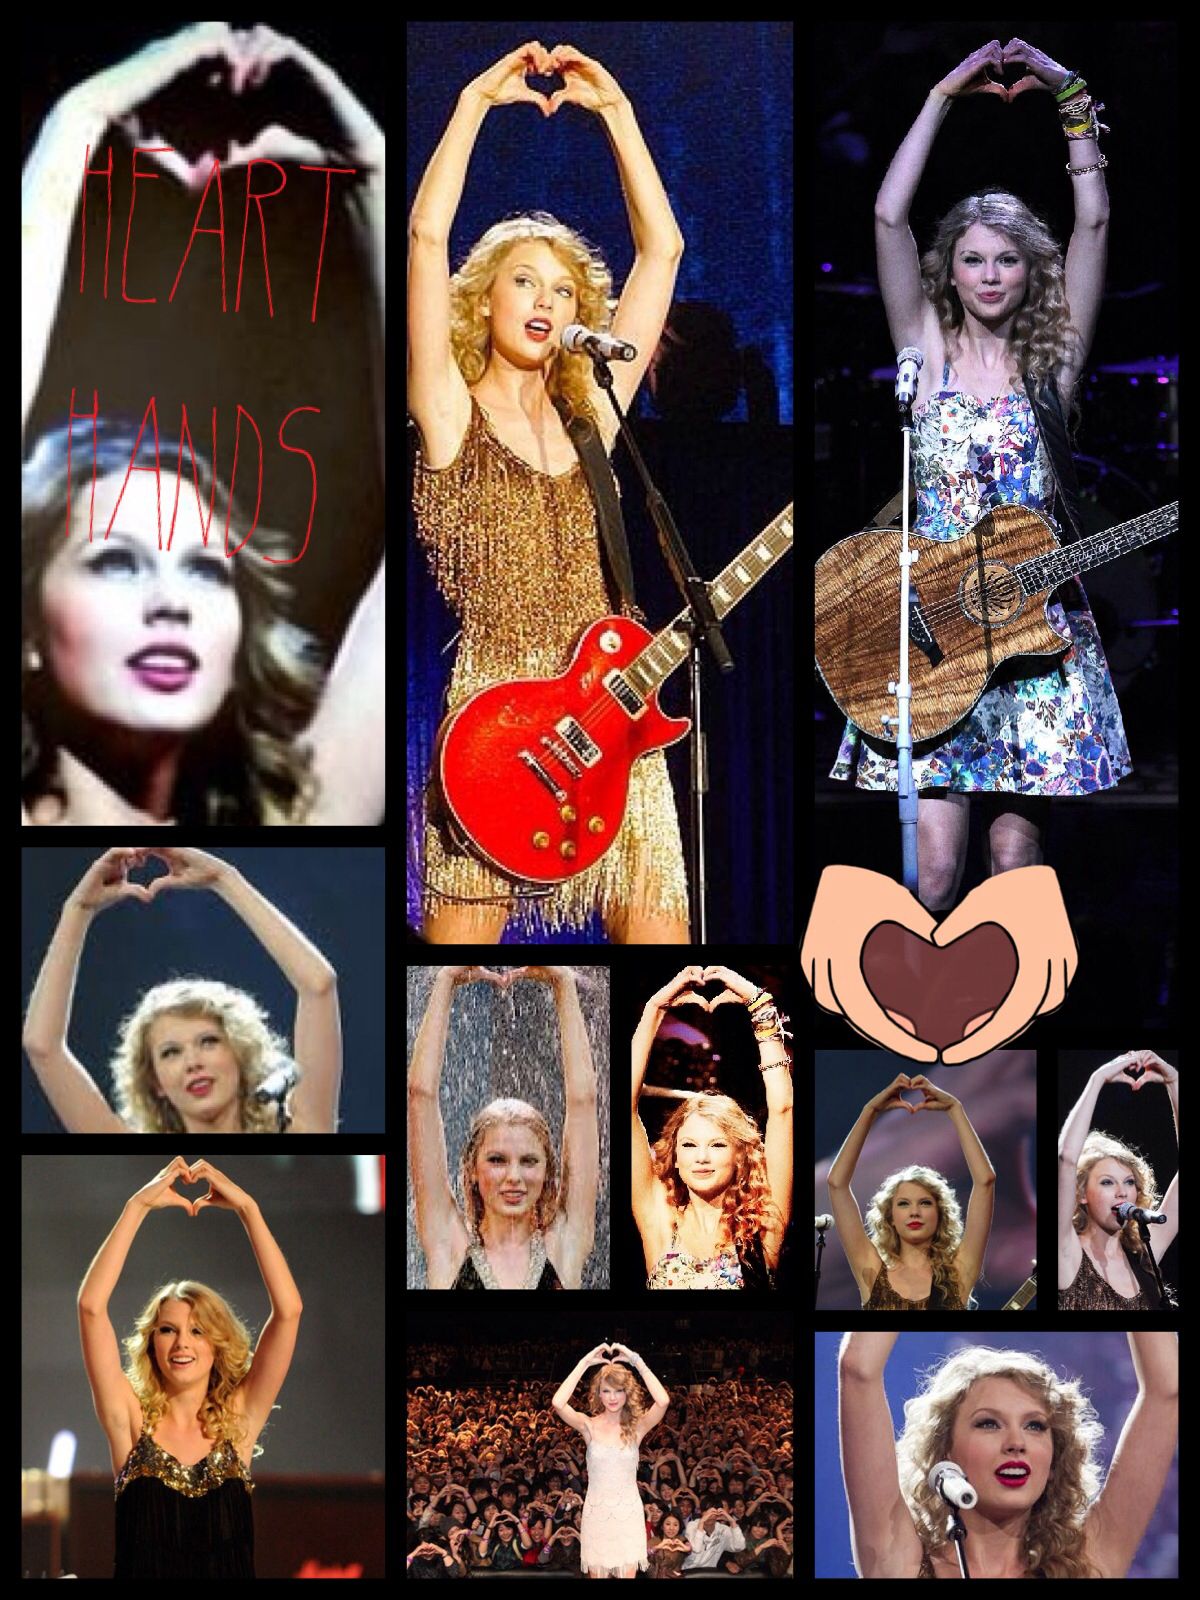 Heart hands. Made this!. Taylor swift